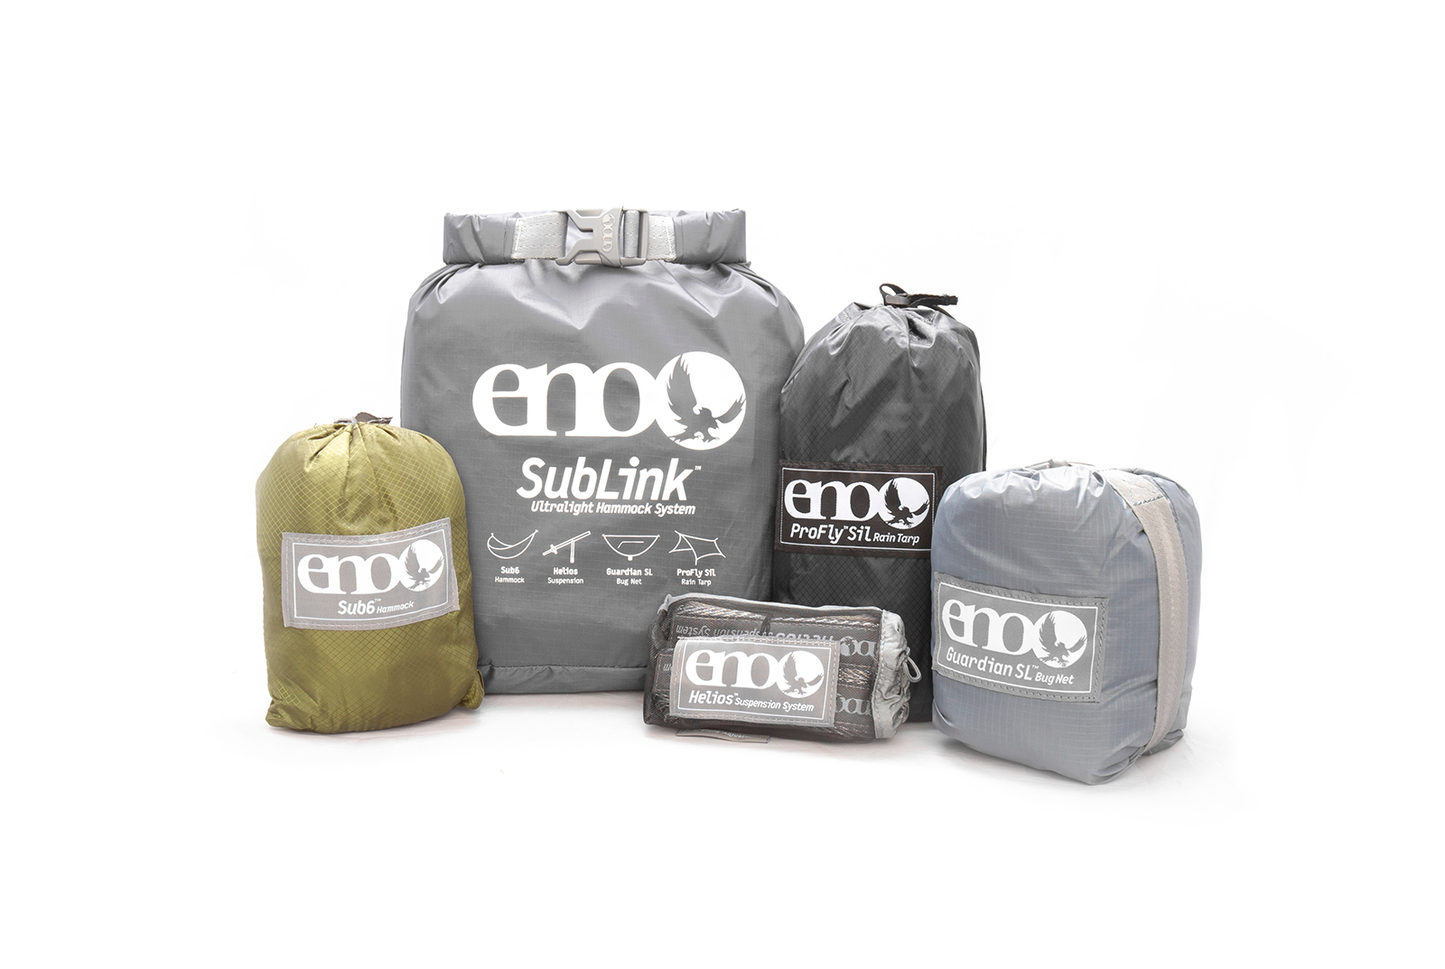 Eagles Nest Outfitters (ENO) SubLink Sleep System